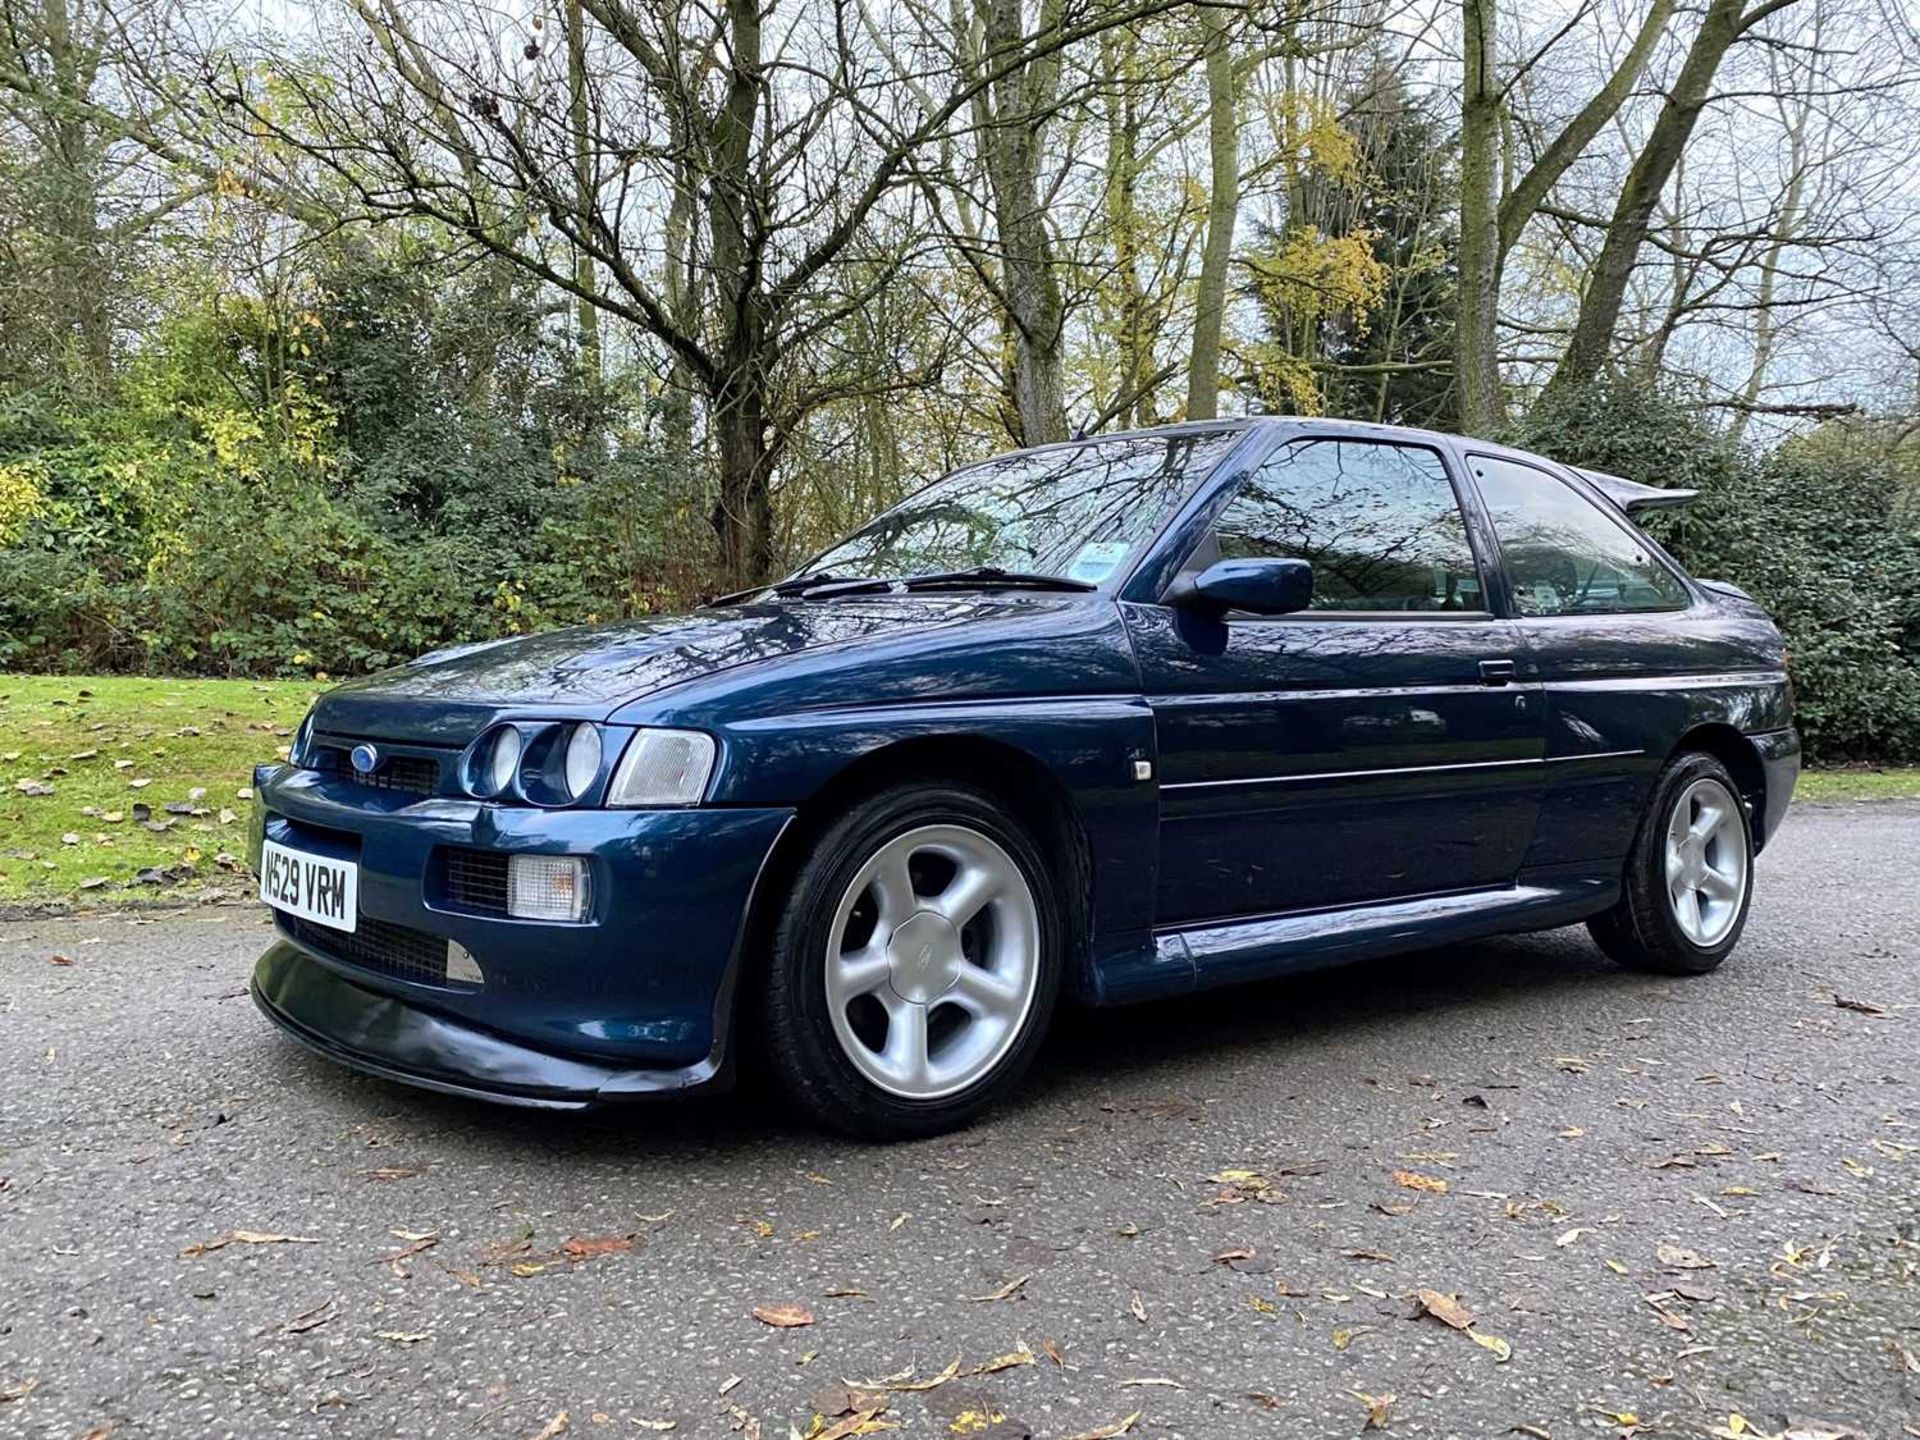 1995 Ford Escort RS Cosworth LUX Only 56,000 miles, finished in rare Petrol Blue - Image 10 of 98